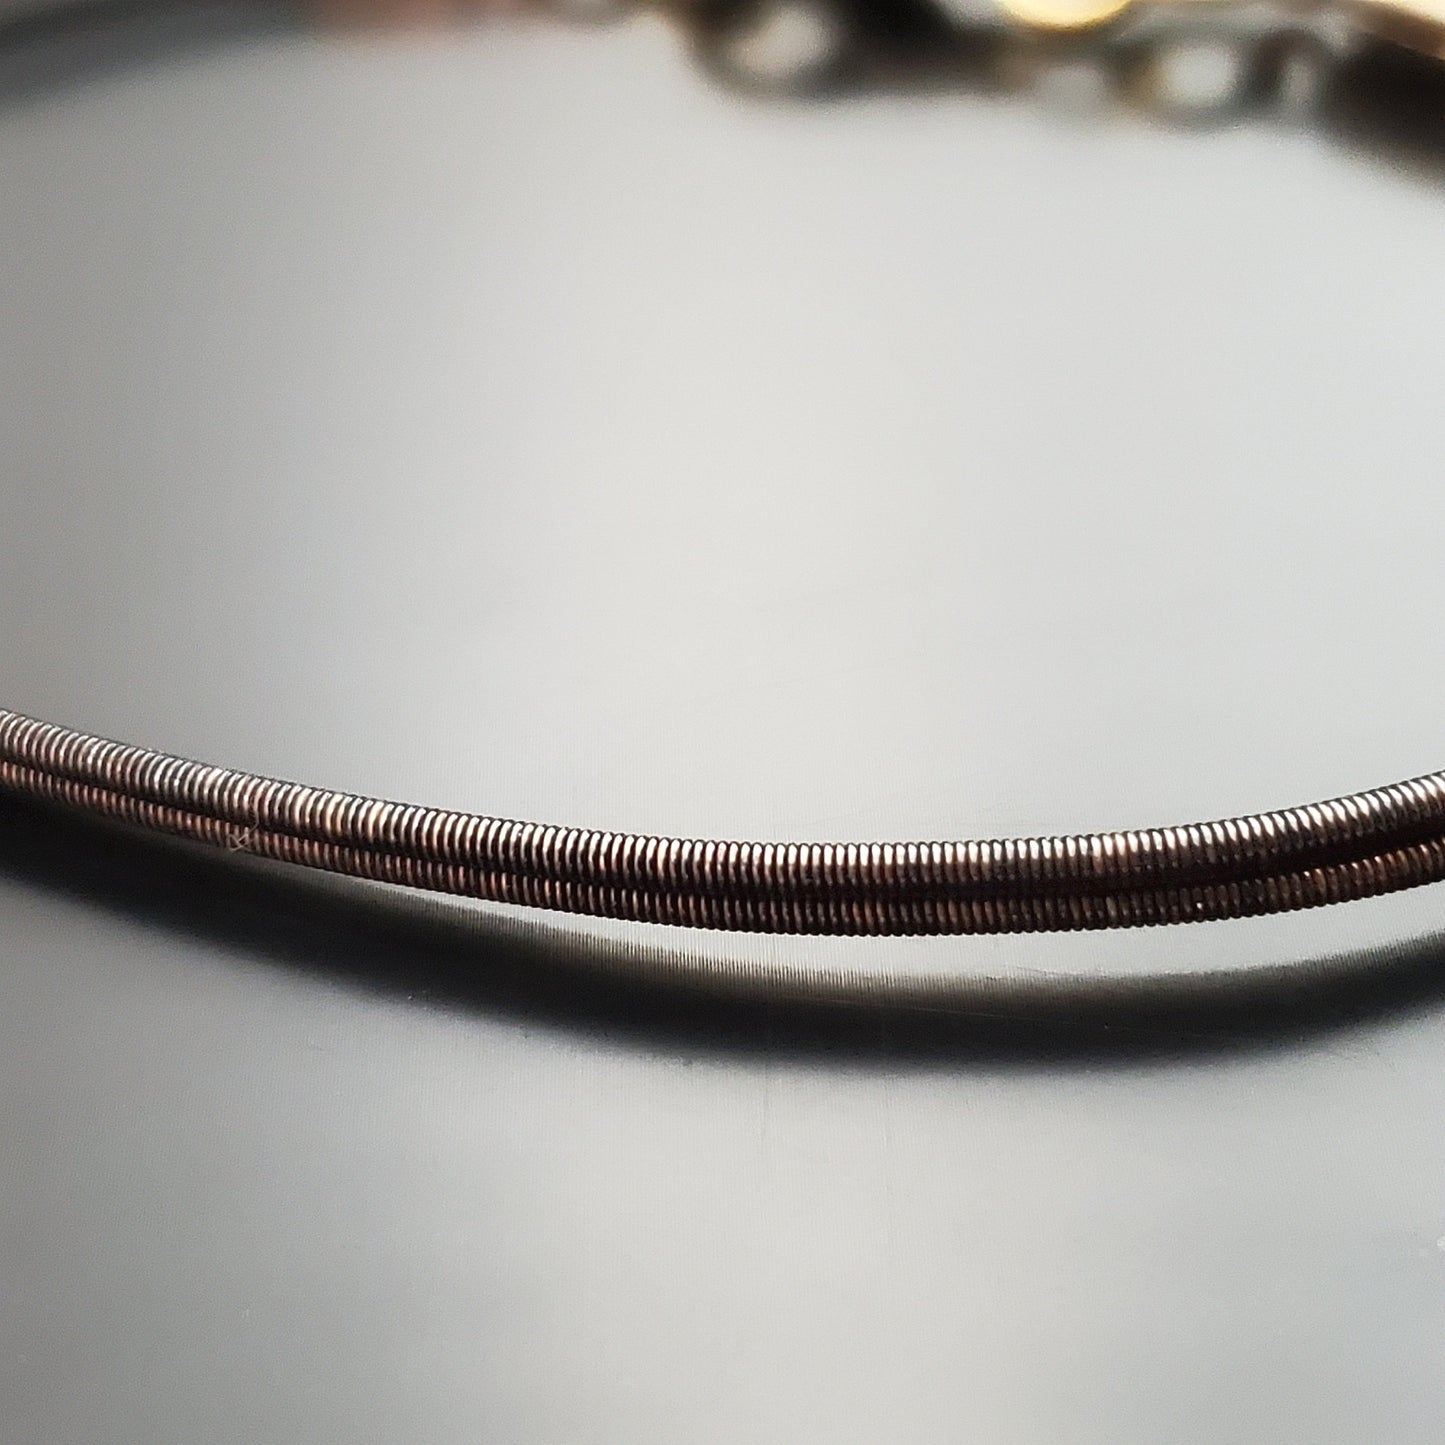 close-up of a brown clasp style bracelet made from an upcycled harp string